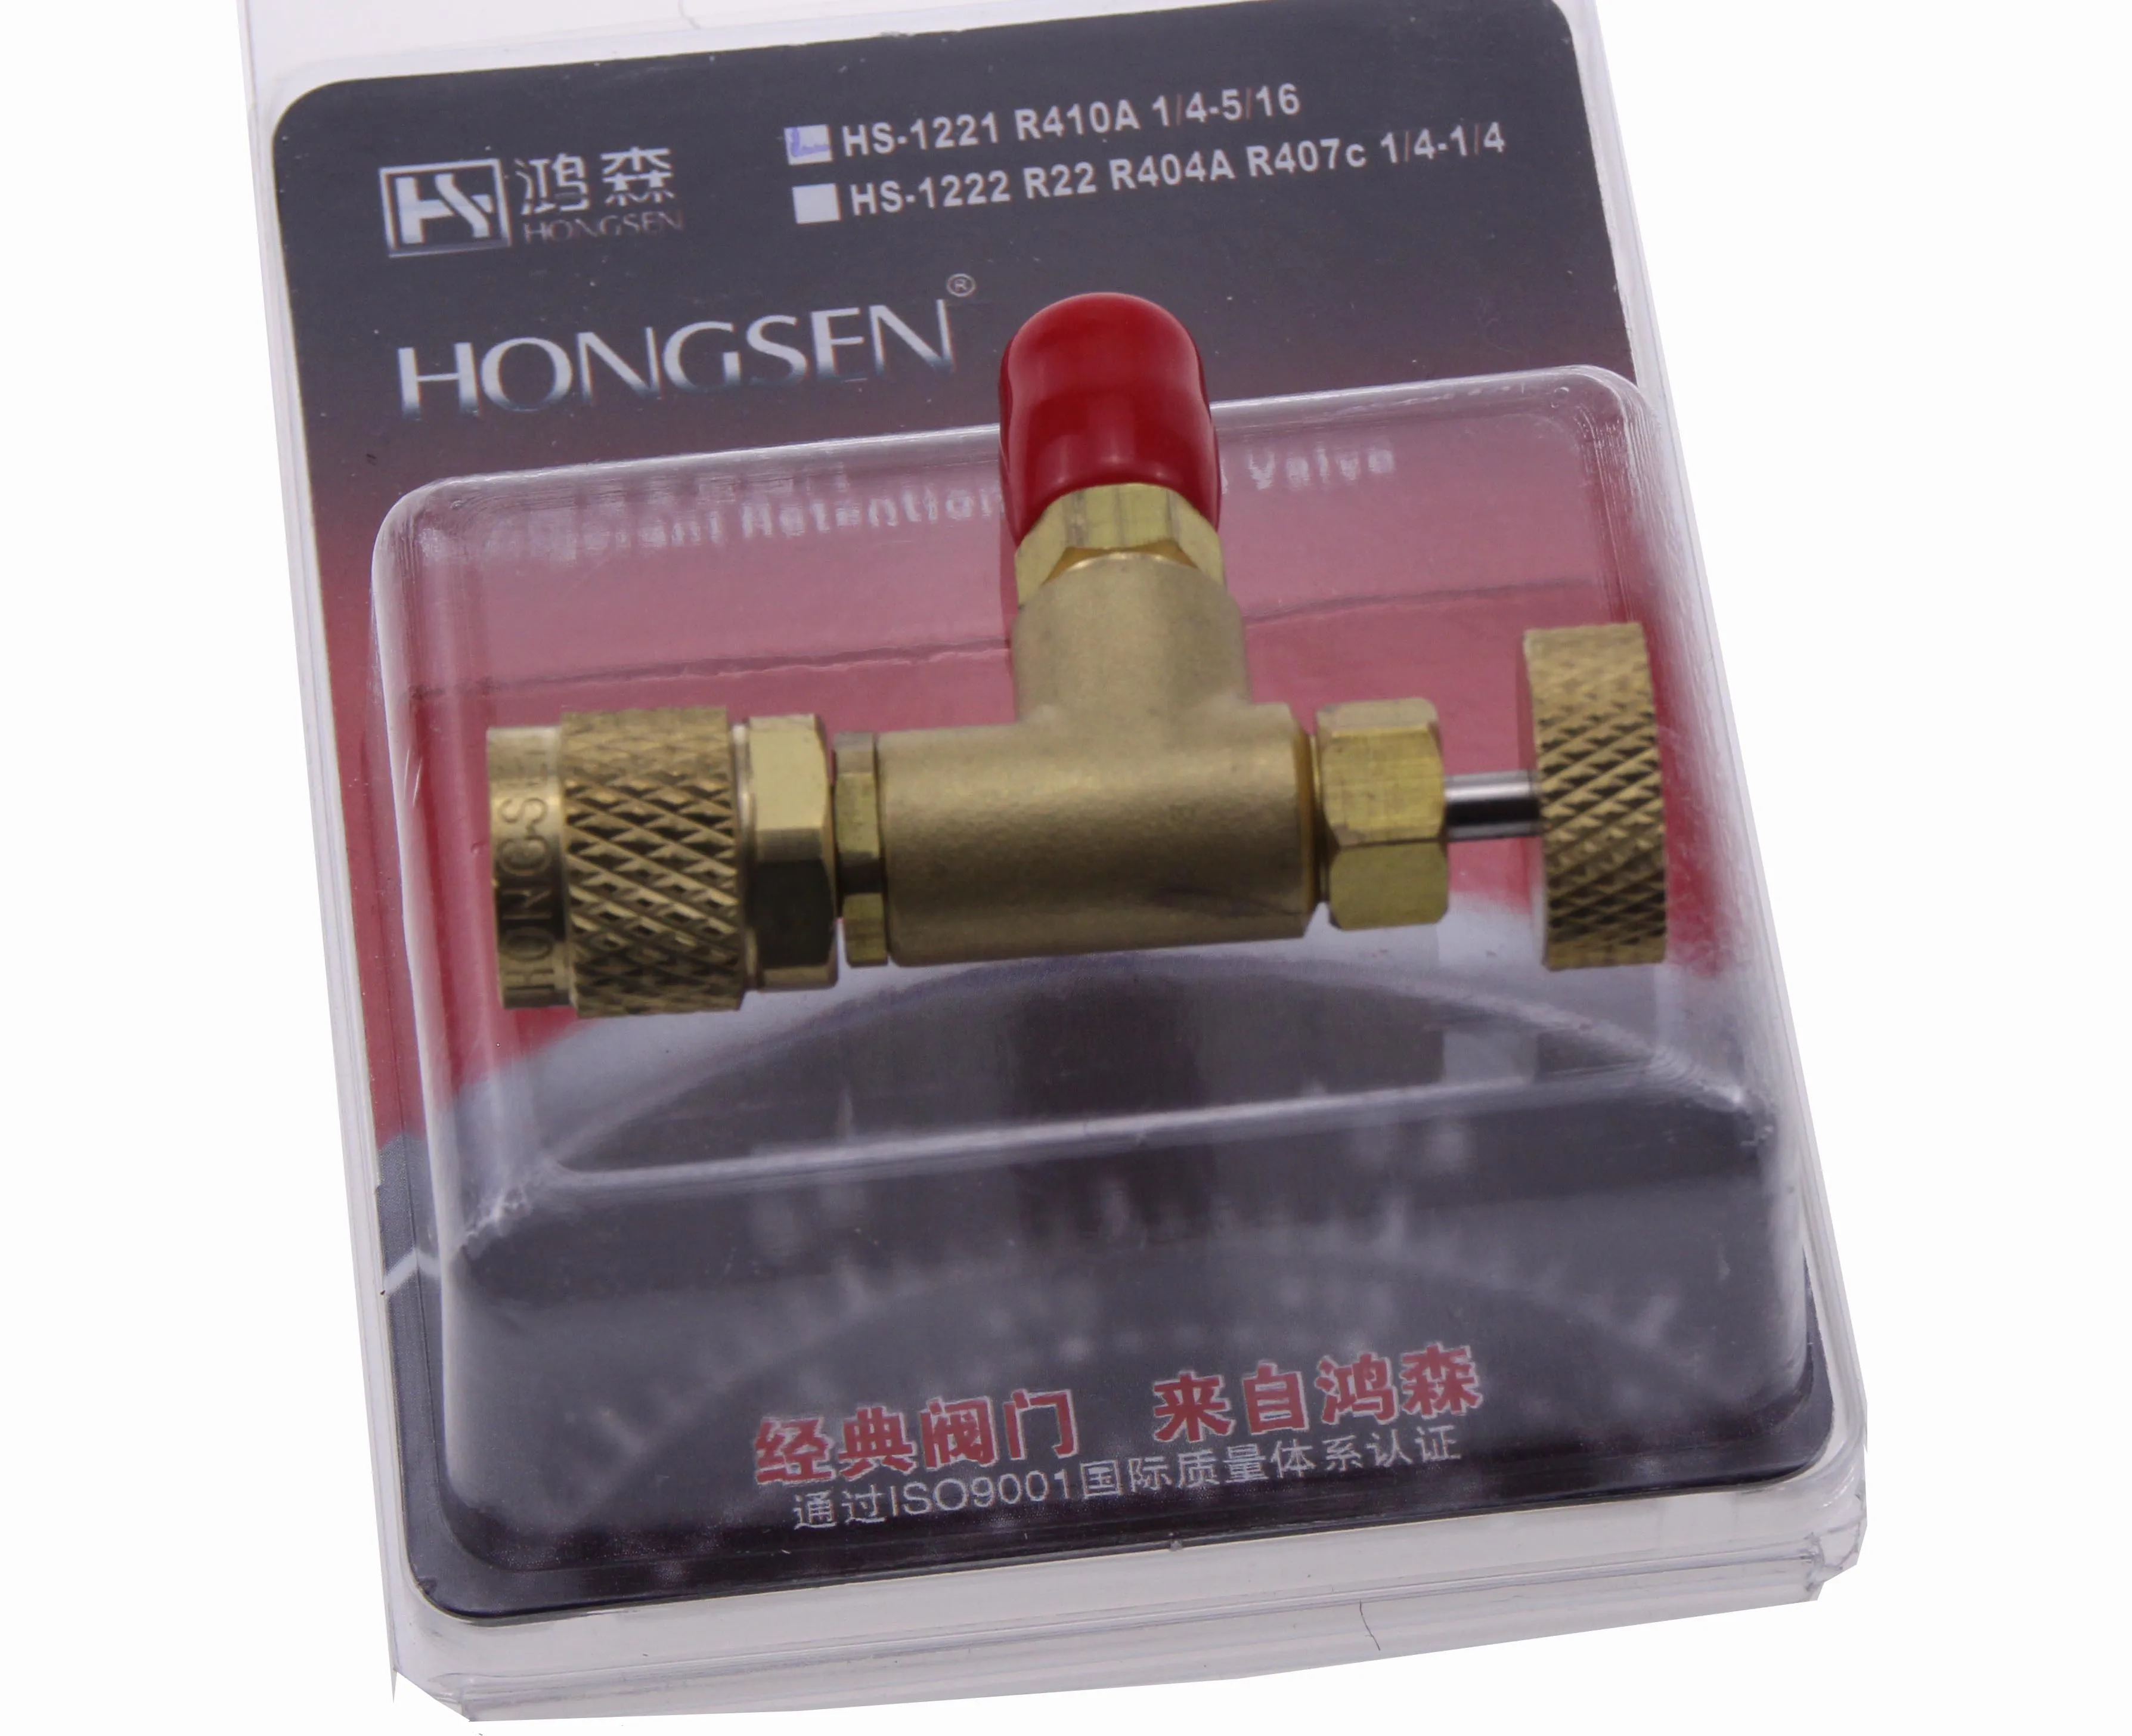 

HOT SALE HS-1222 R22 Refrigeration Charging Adapter For 1/4" SAE Male to 1/4"SAE Famale Safety Adaptor